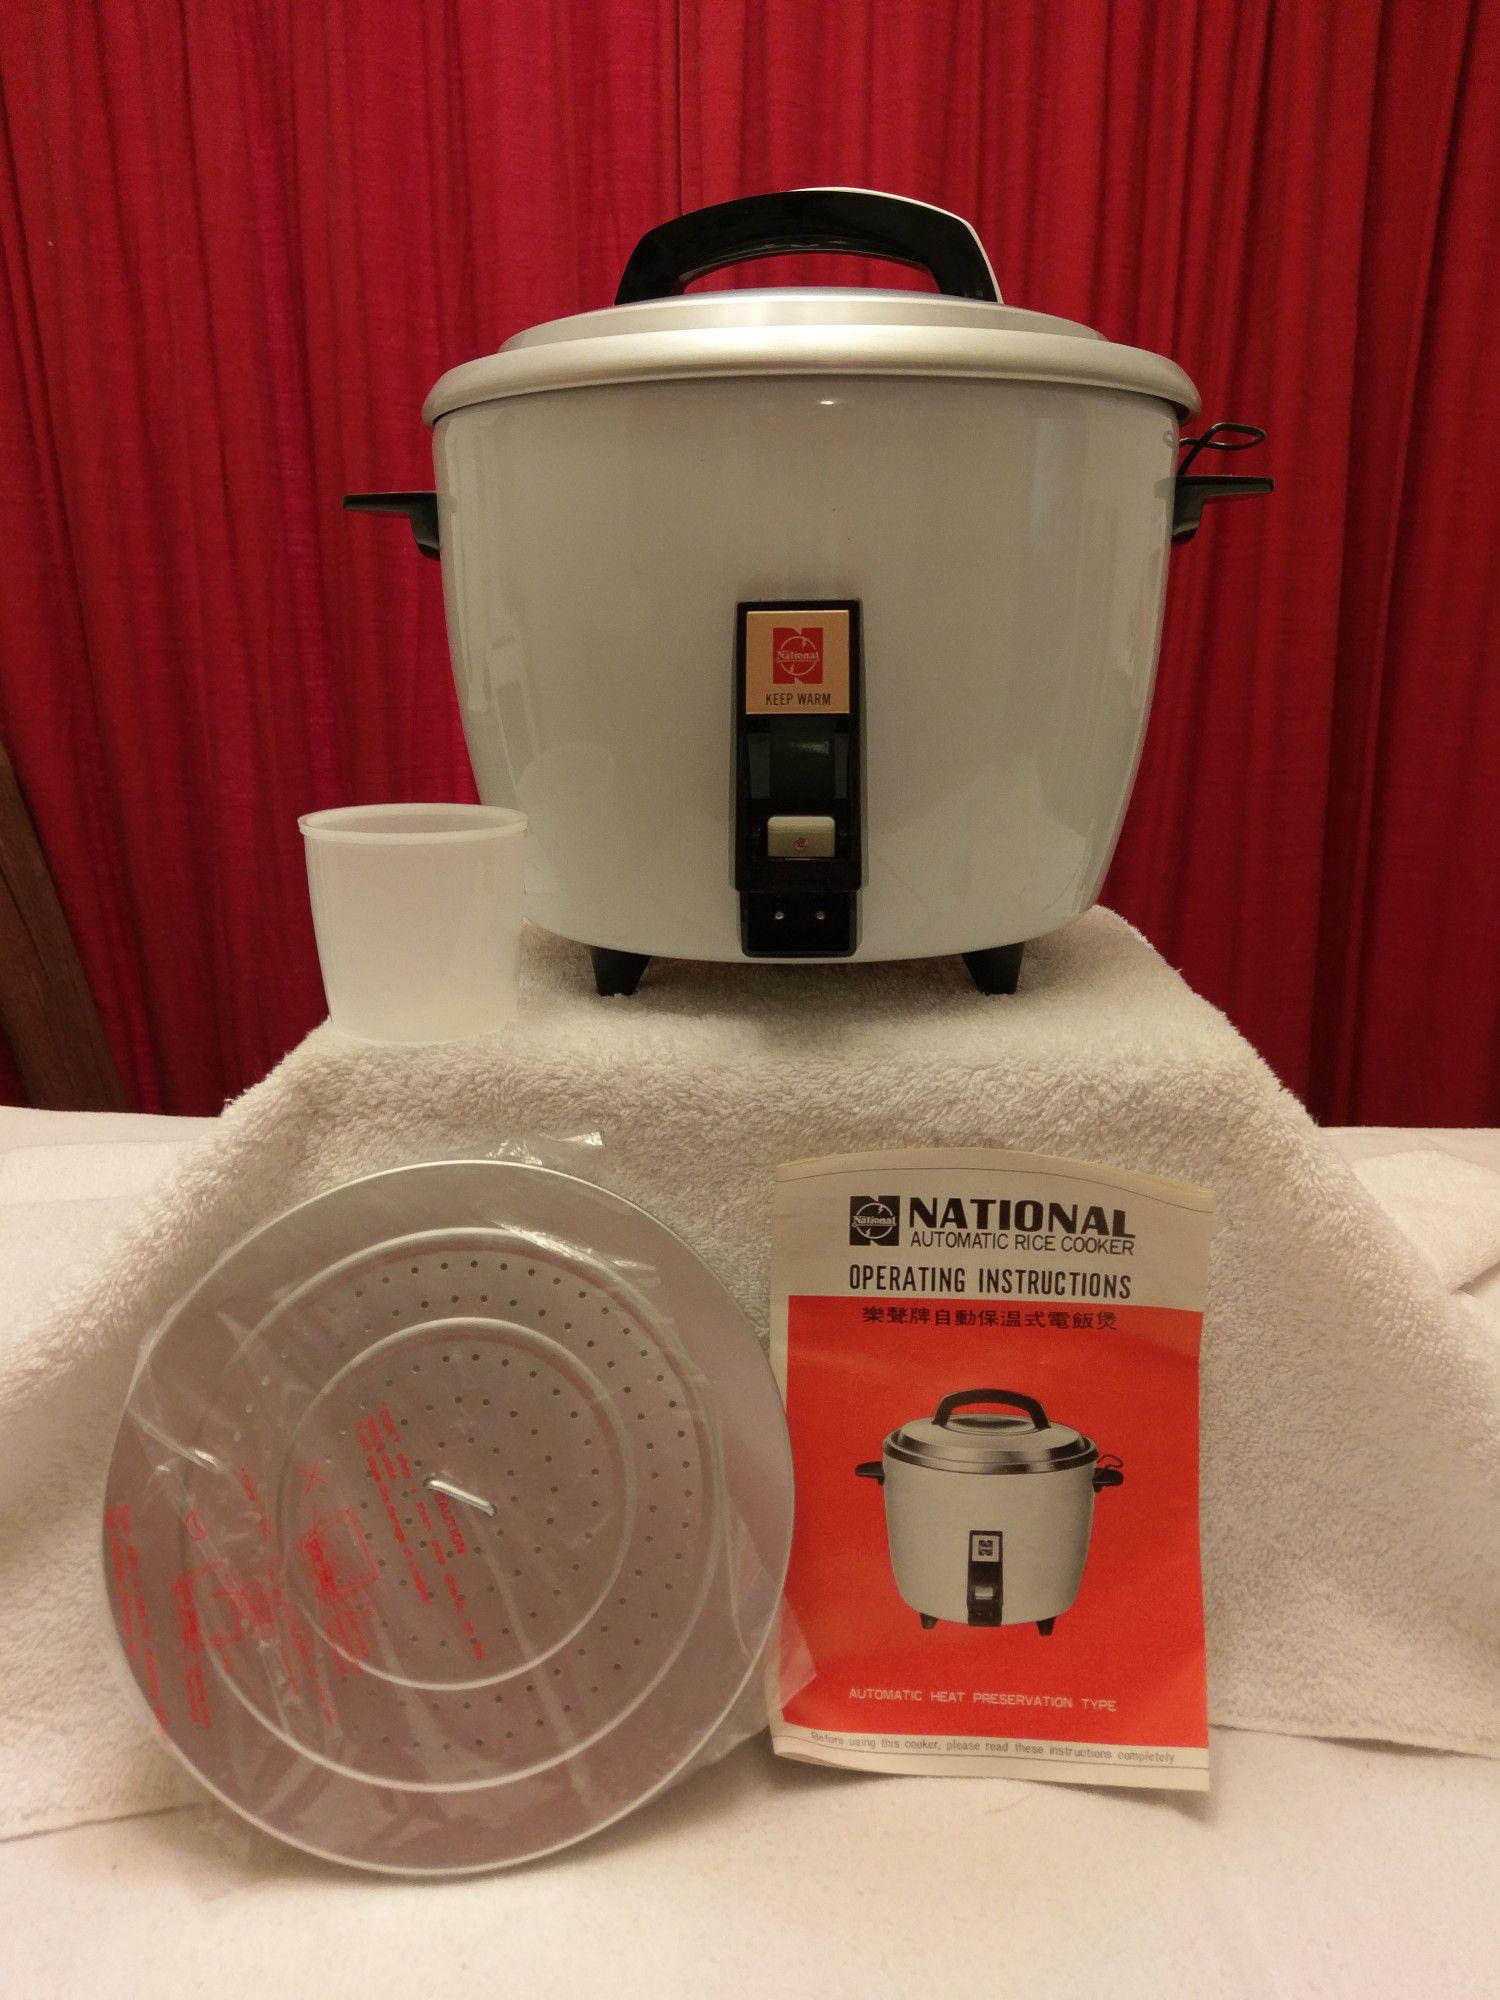 Wolfgang Puck Mini Rice Cooker for Sale in Tulare, CA - OfferUp